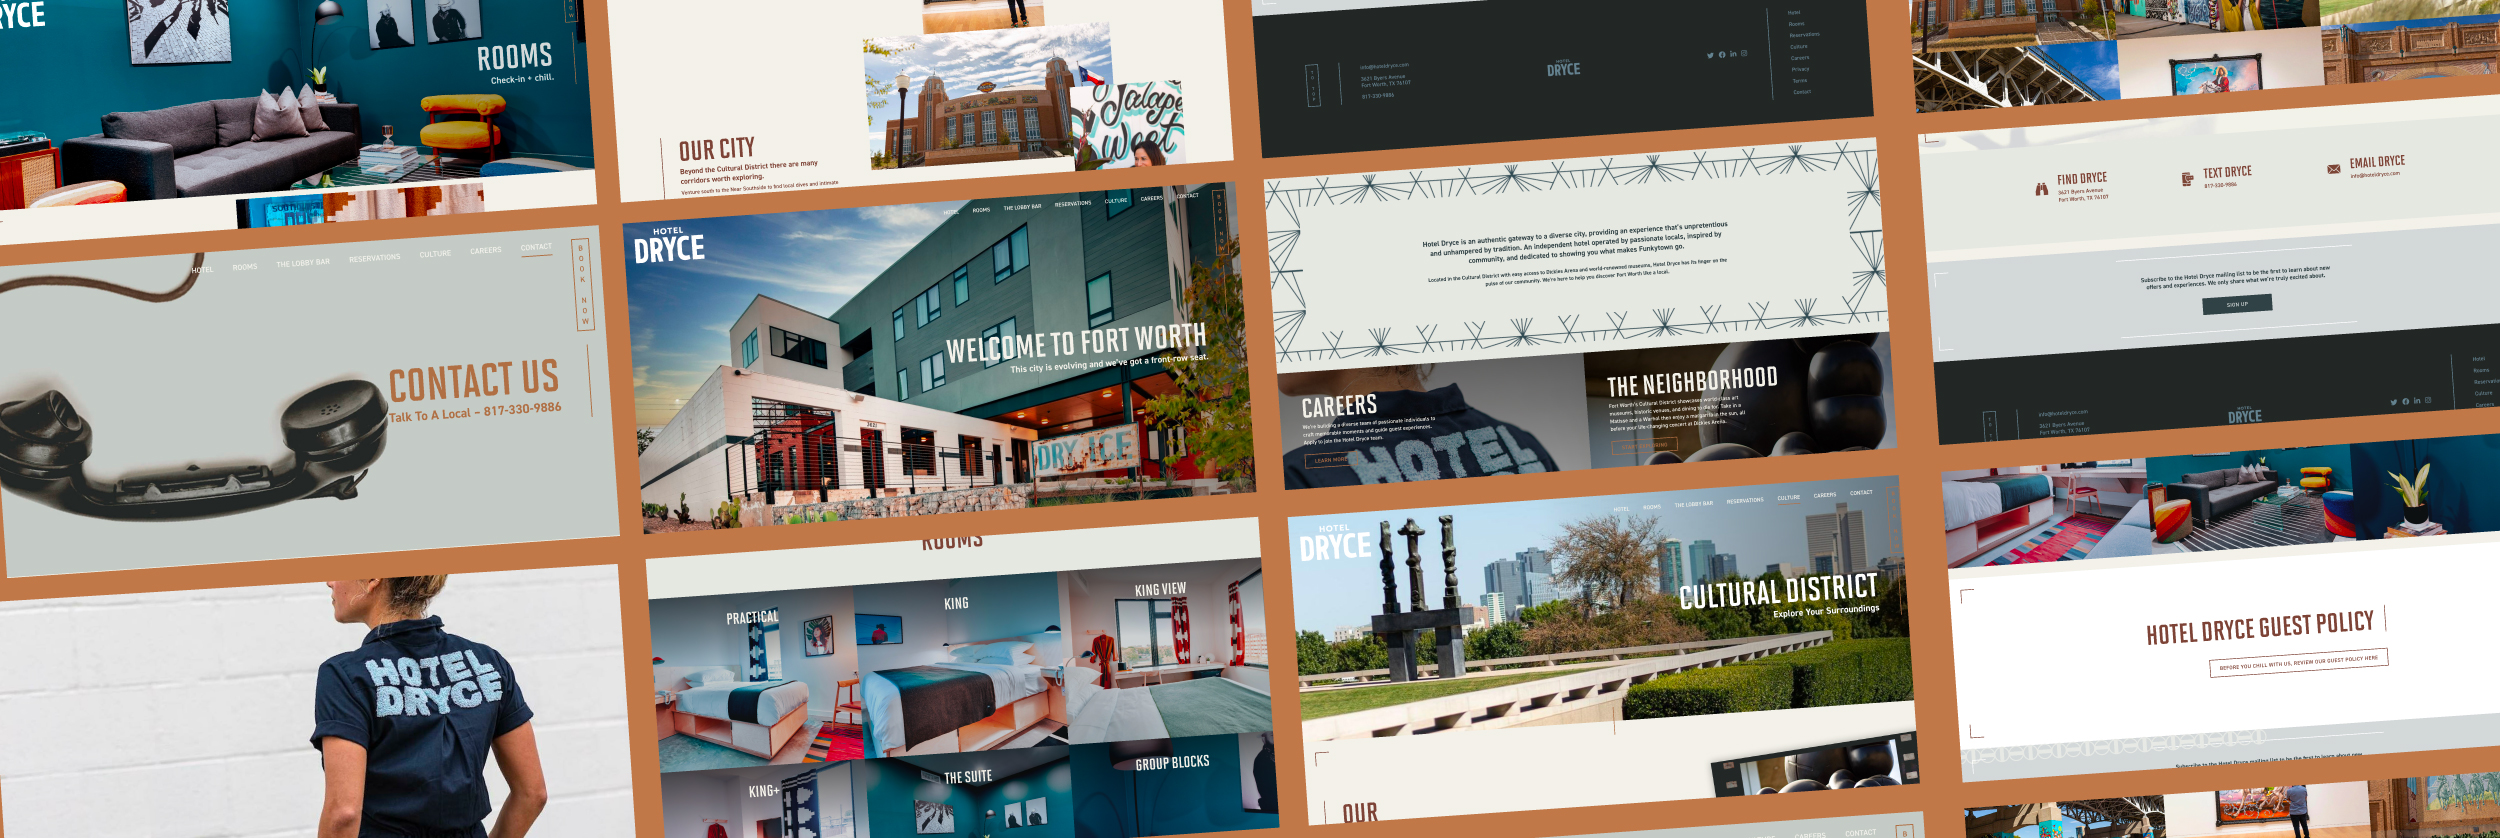 Website Branding for Hotel Dryce Fort Worth Texas